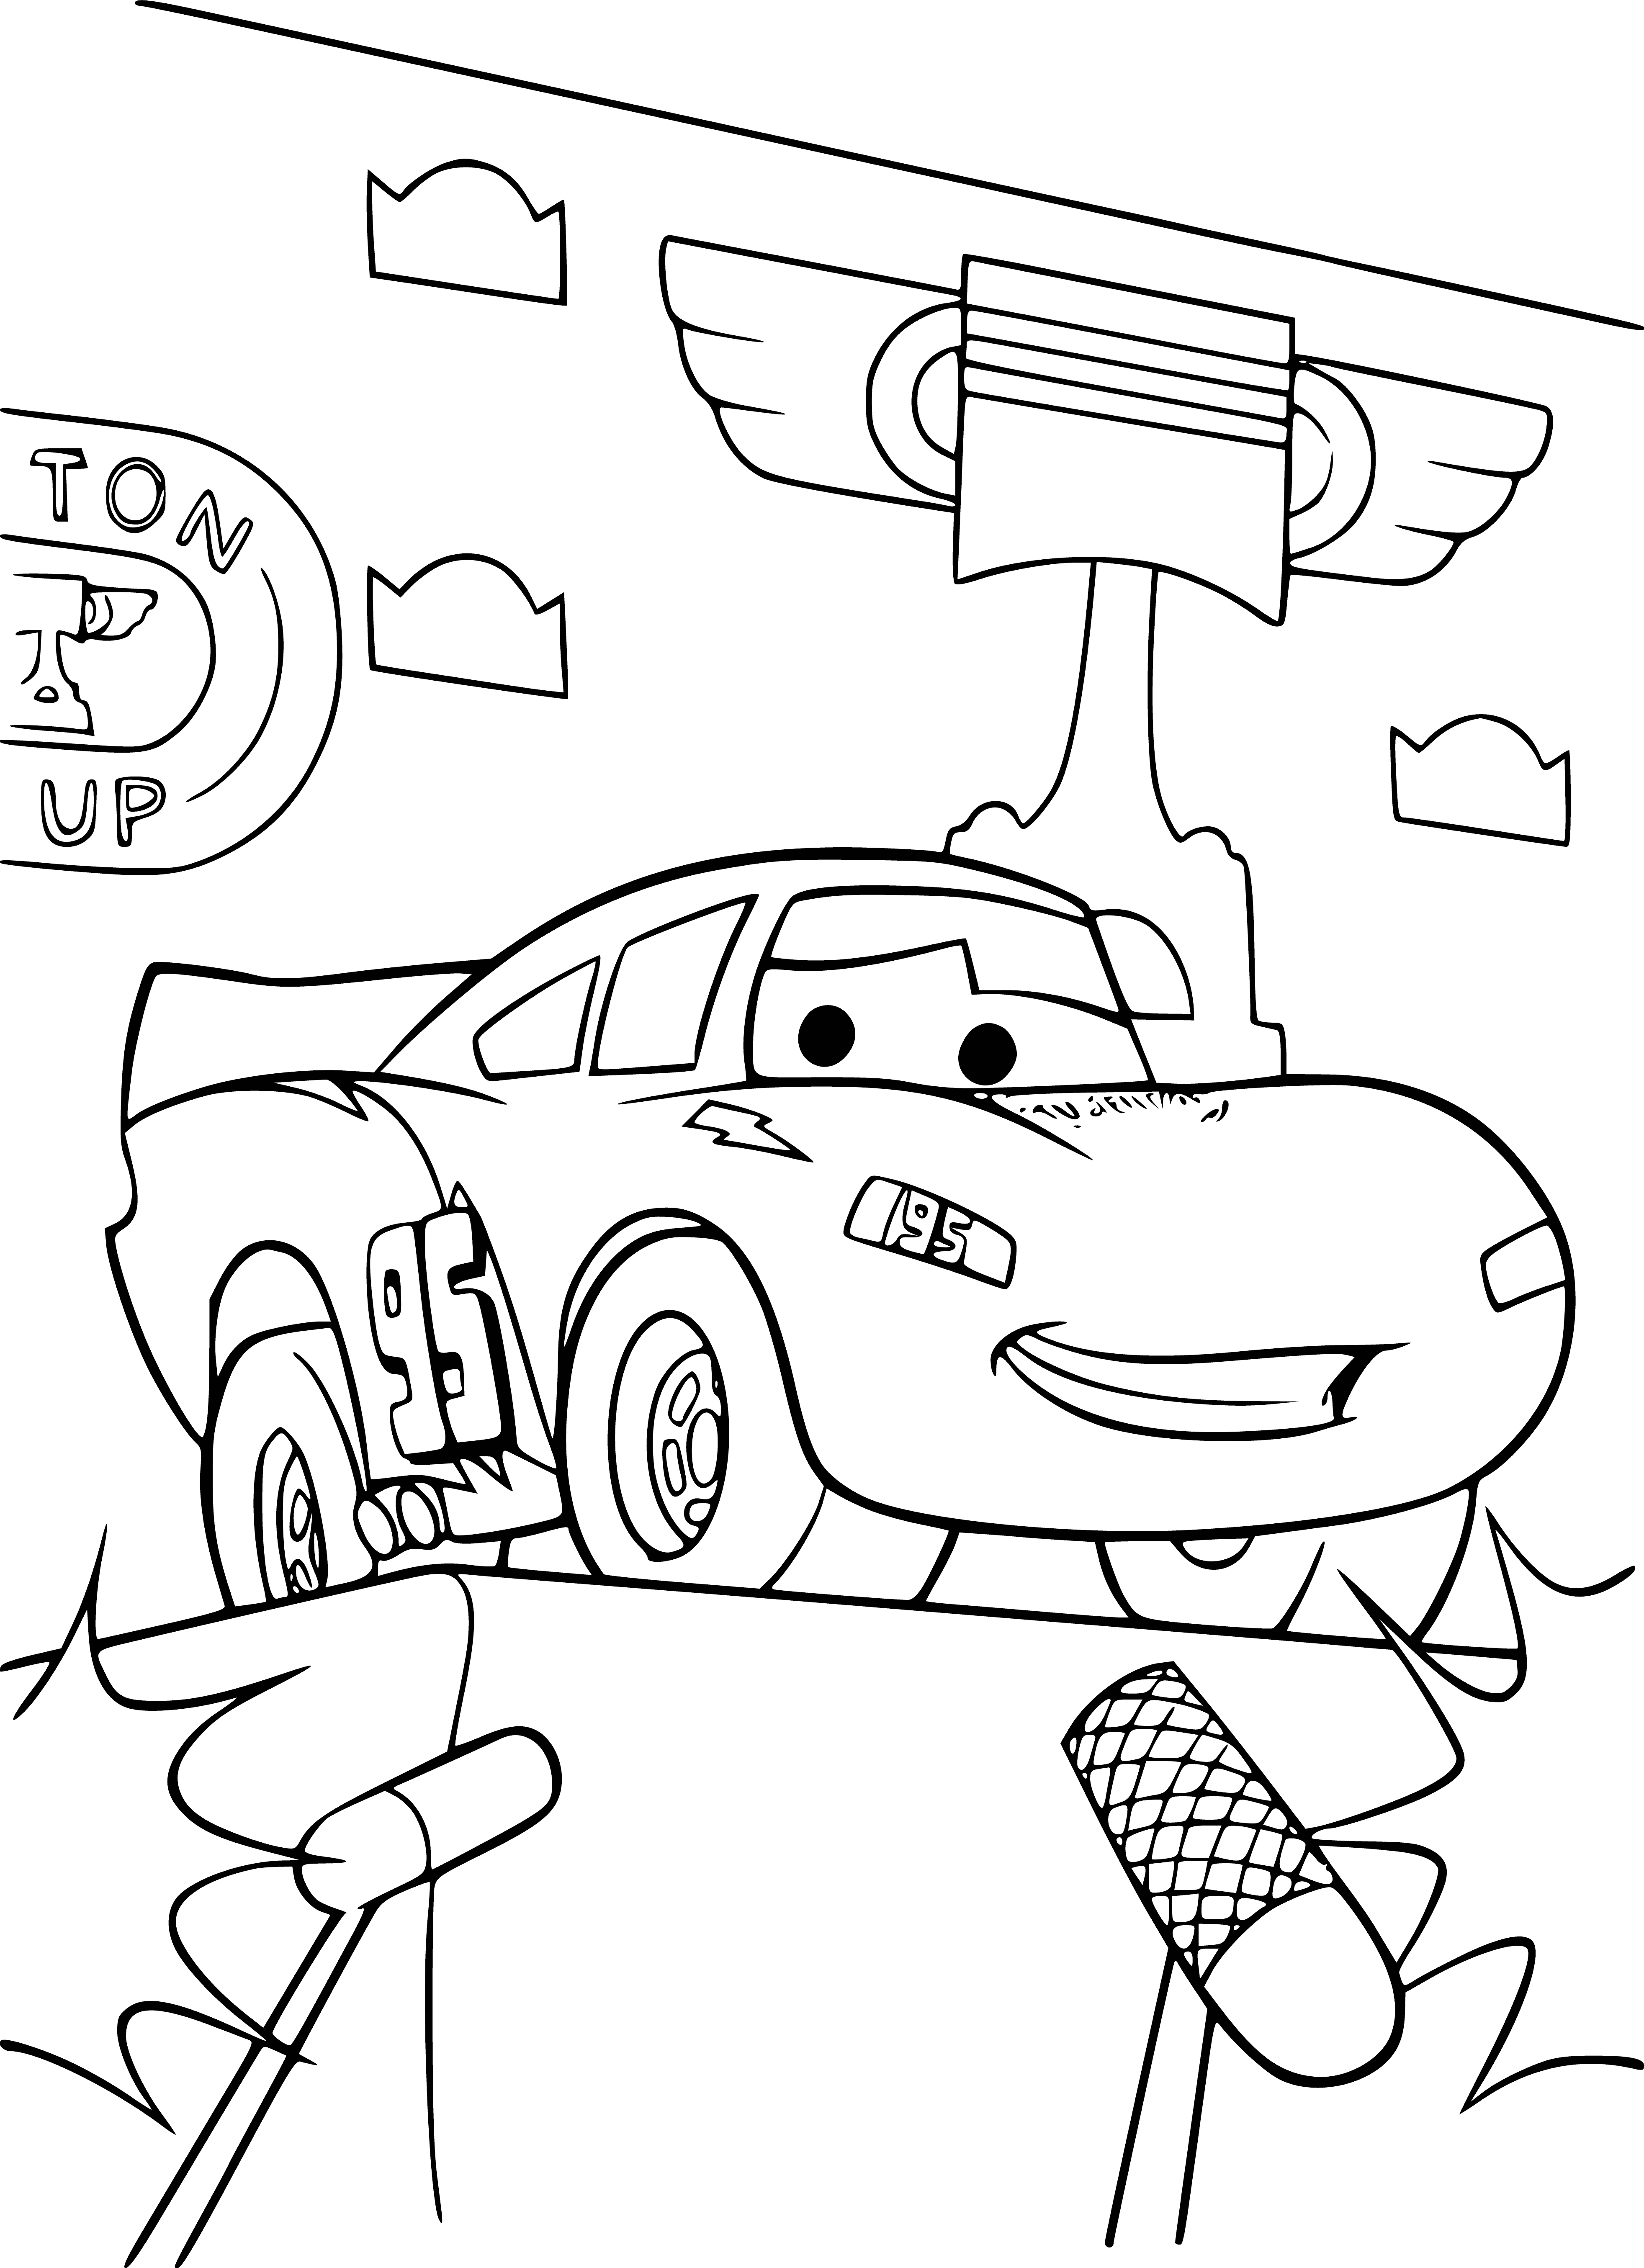 Winner McQueen coloring page